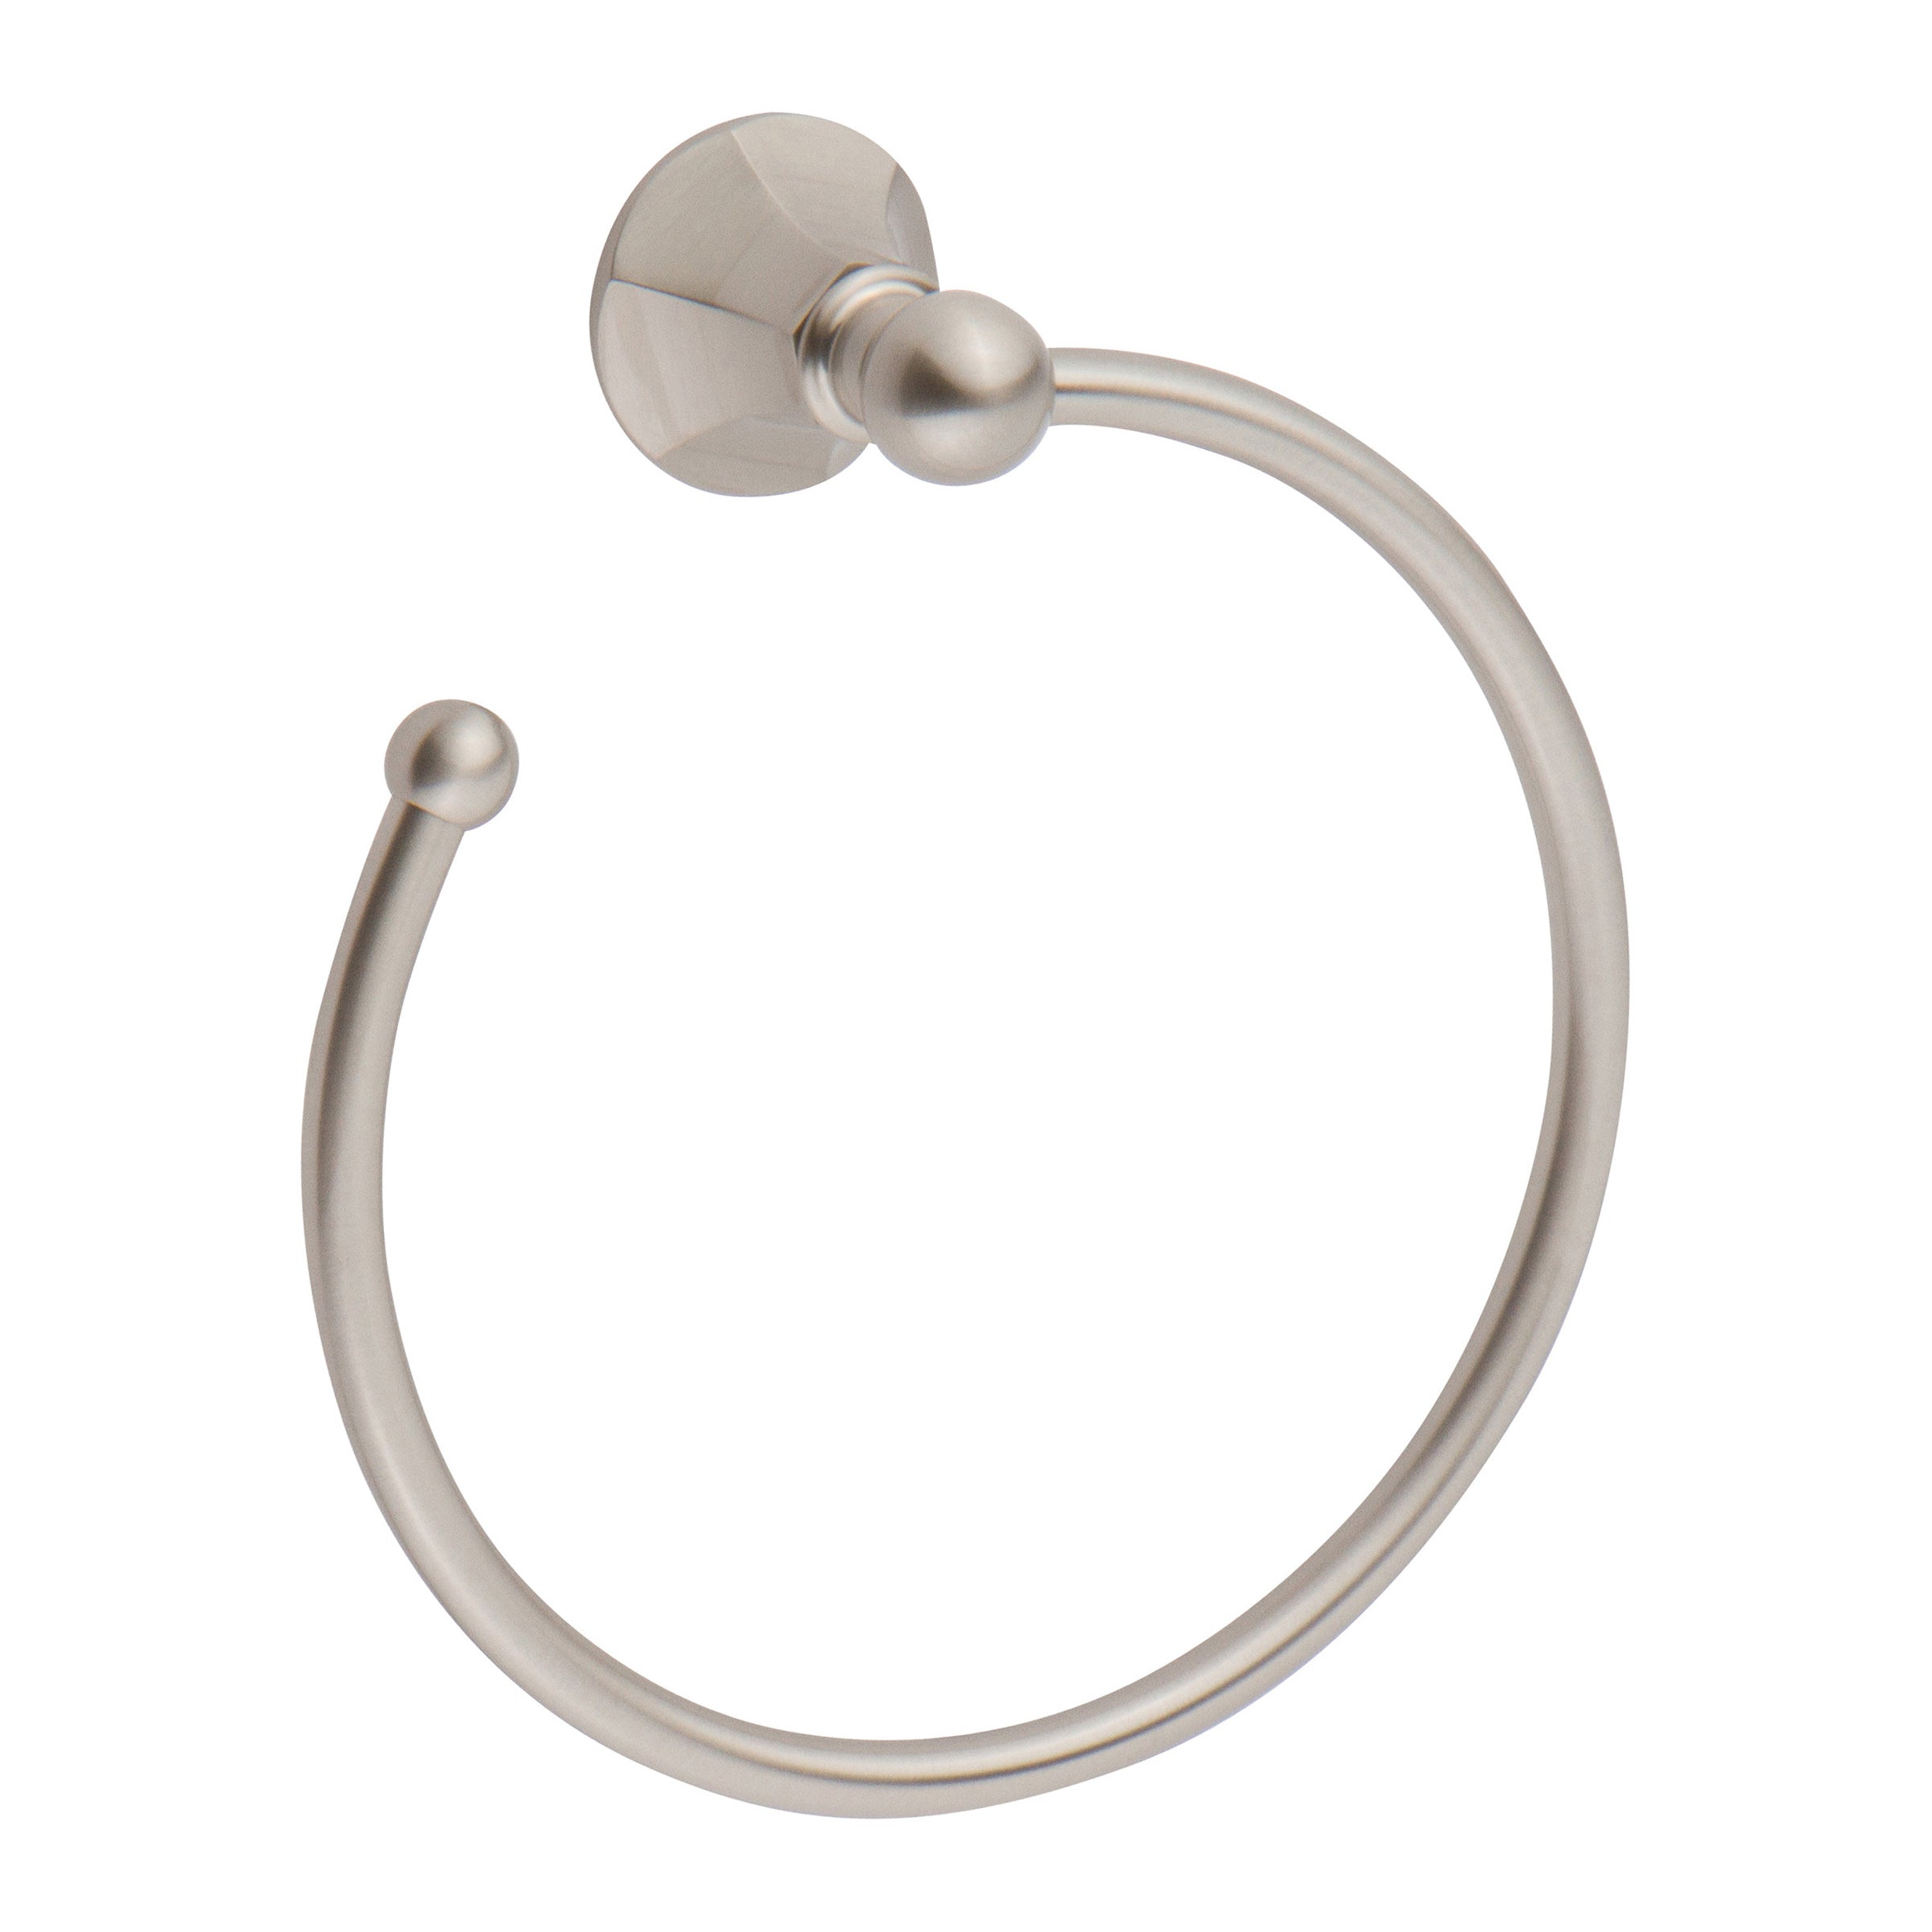 Ginger Empire Towel Ring - Open